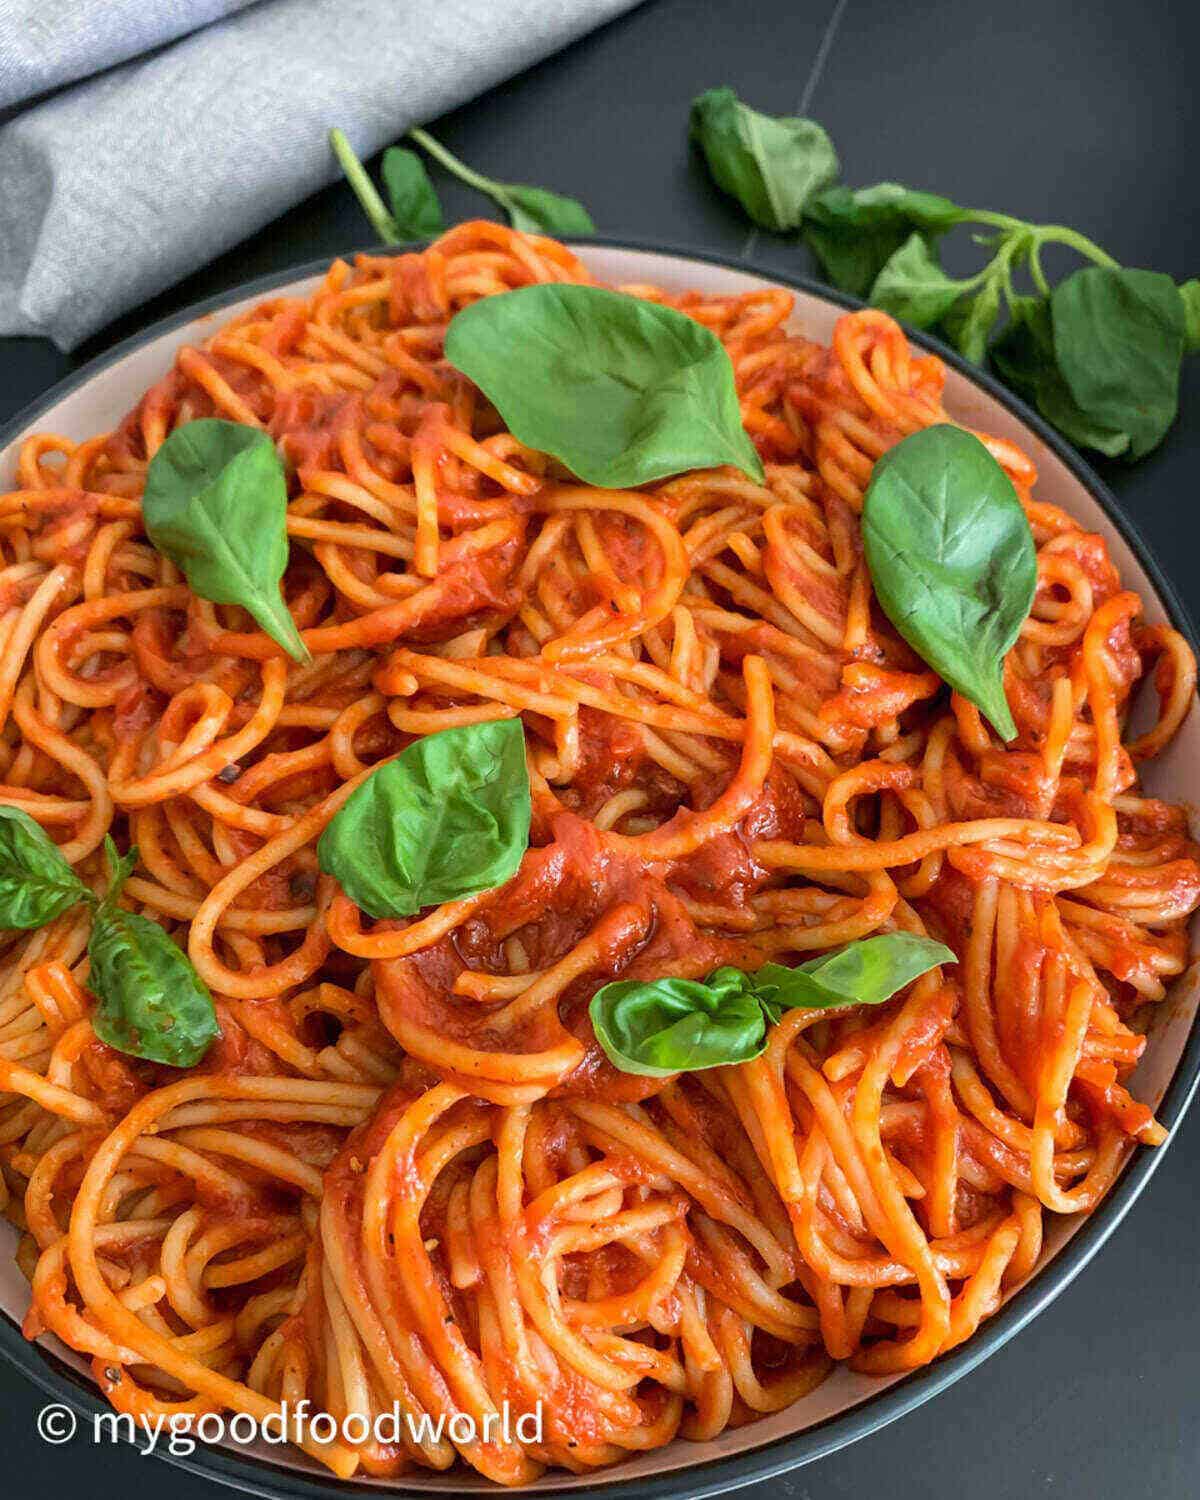 Spaghetti in tomato sauce served in a wide bowl with a black border and garnished with fresh basil leaves.